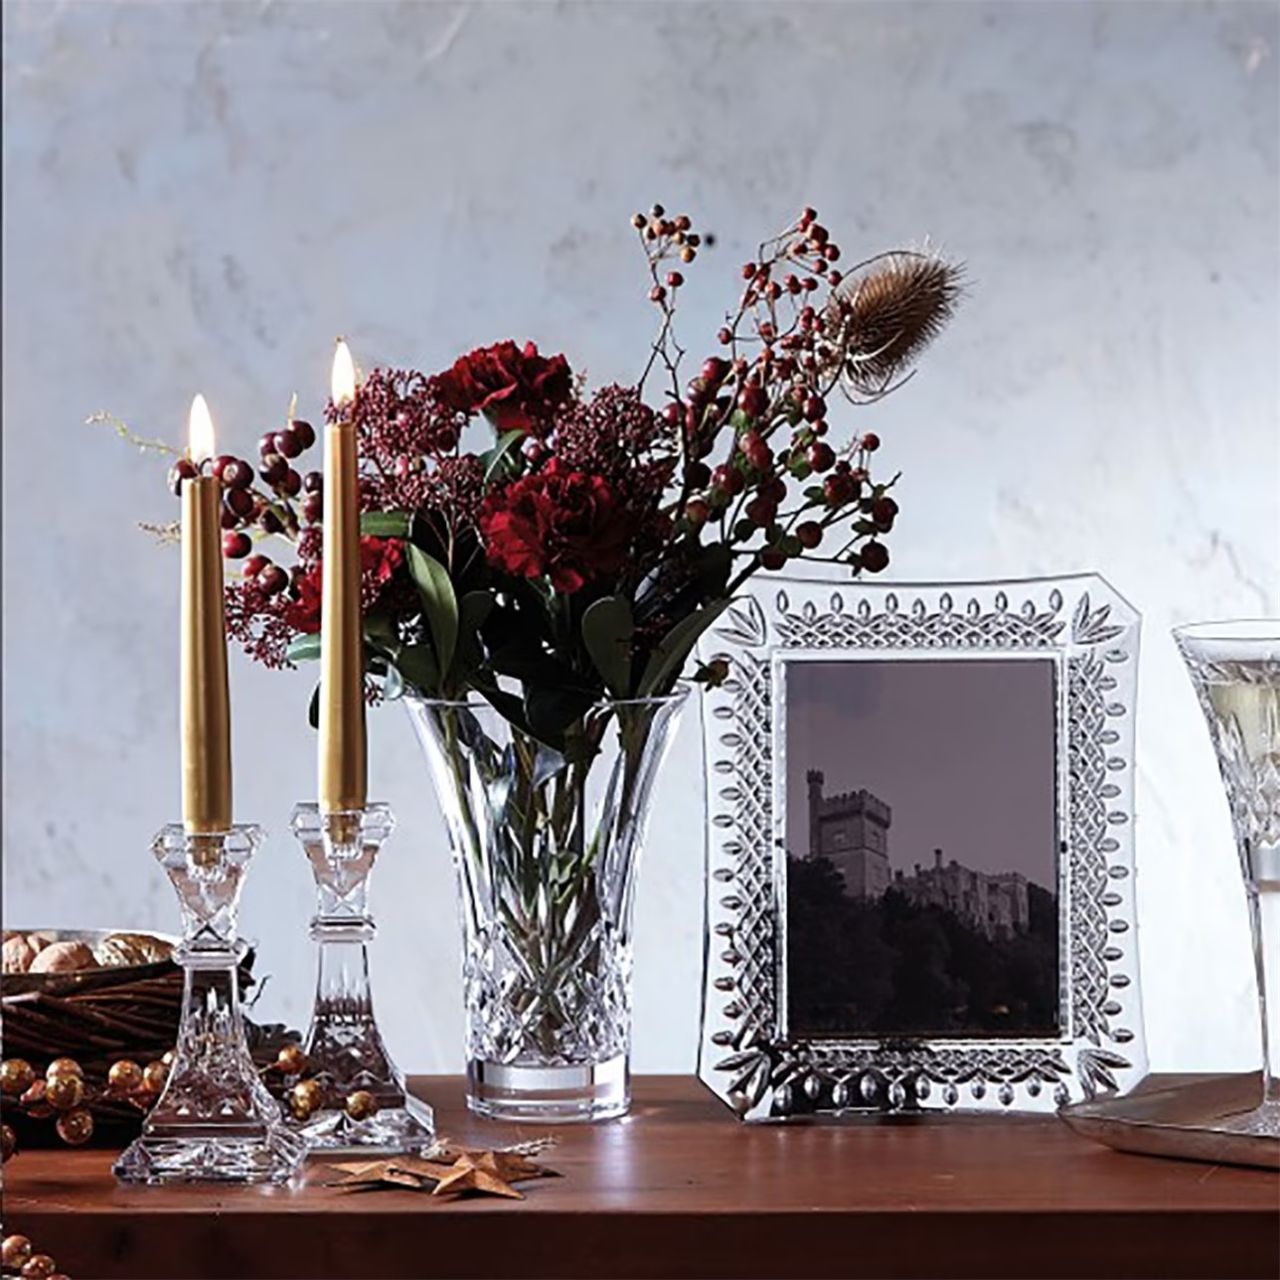 Waterford Crystal Lismore Photo Frame 5 x 7  Share beautiful memories in your living space with luxury crystal picture frames, hand crafted with care and designed to complement your most precious memories.